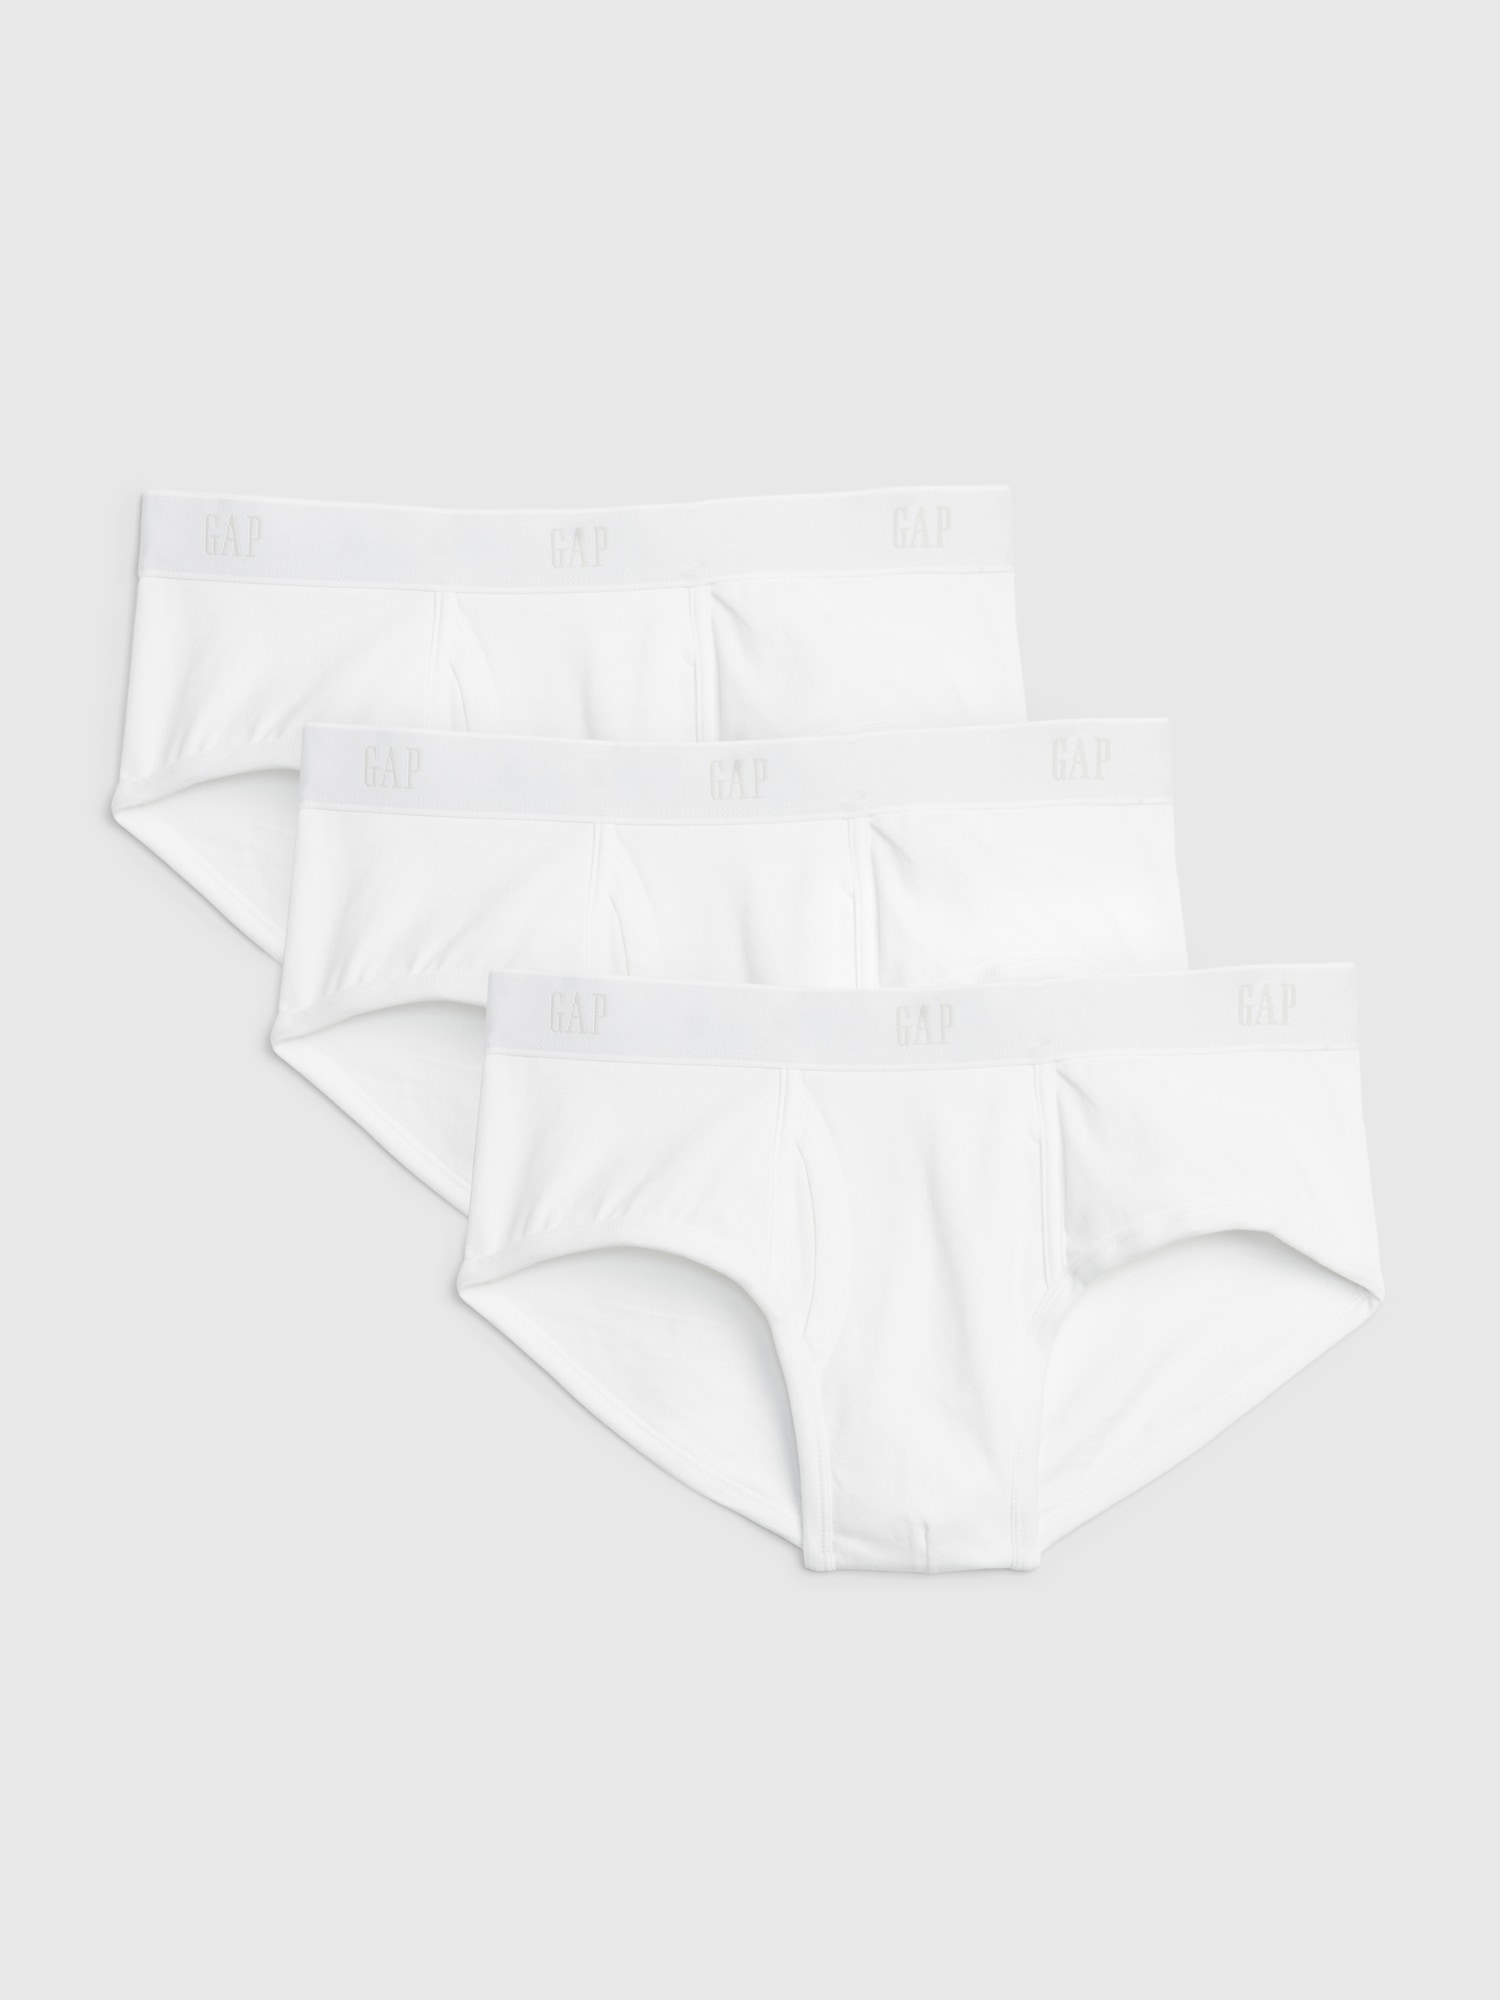  GAP Unisex Baby 3-pack Underpants Underwear Briefs, Multi, 2-3T  US: Clothing, Shoes & Jewelry